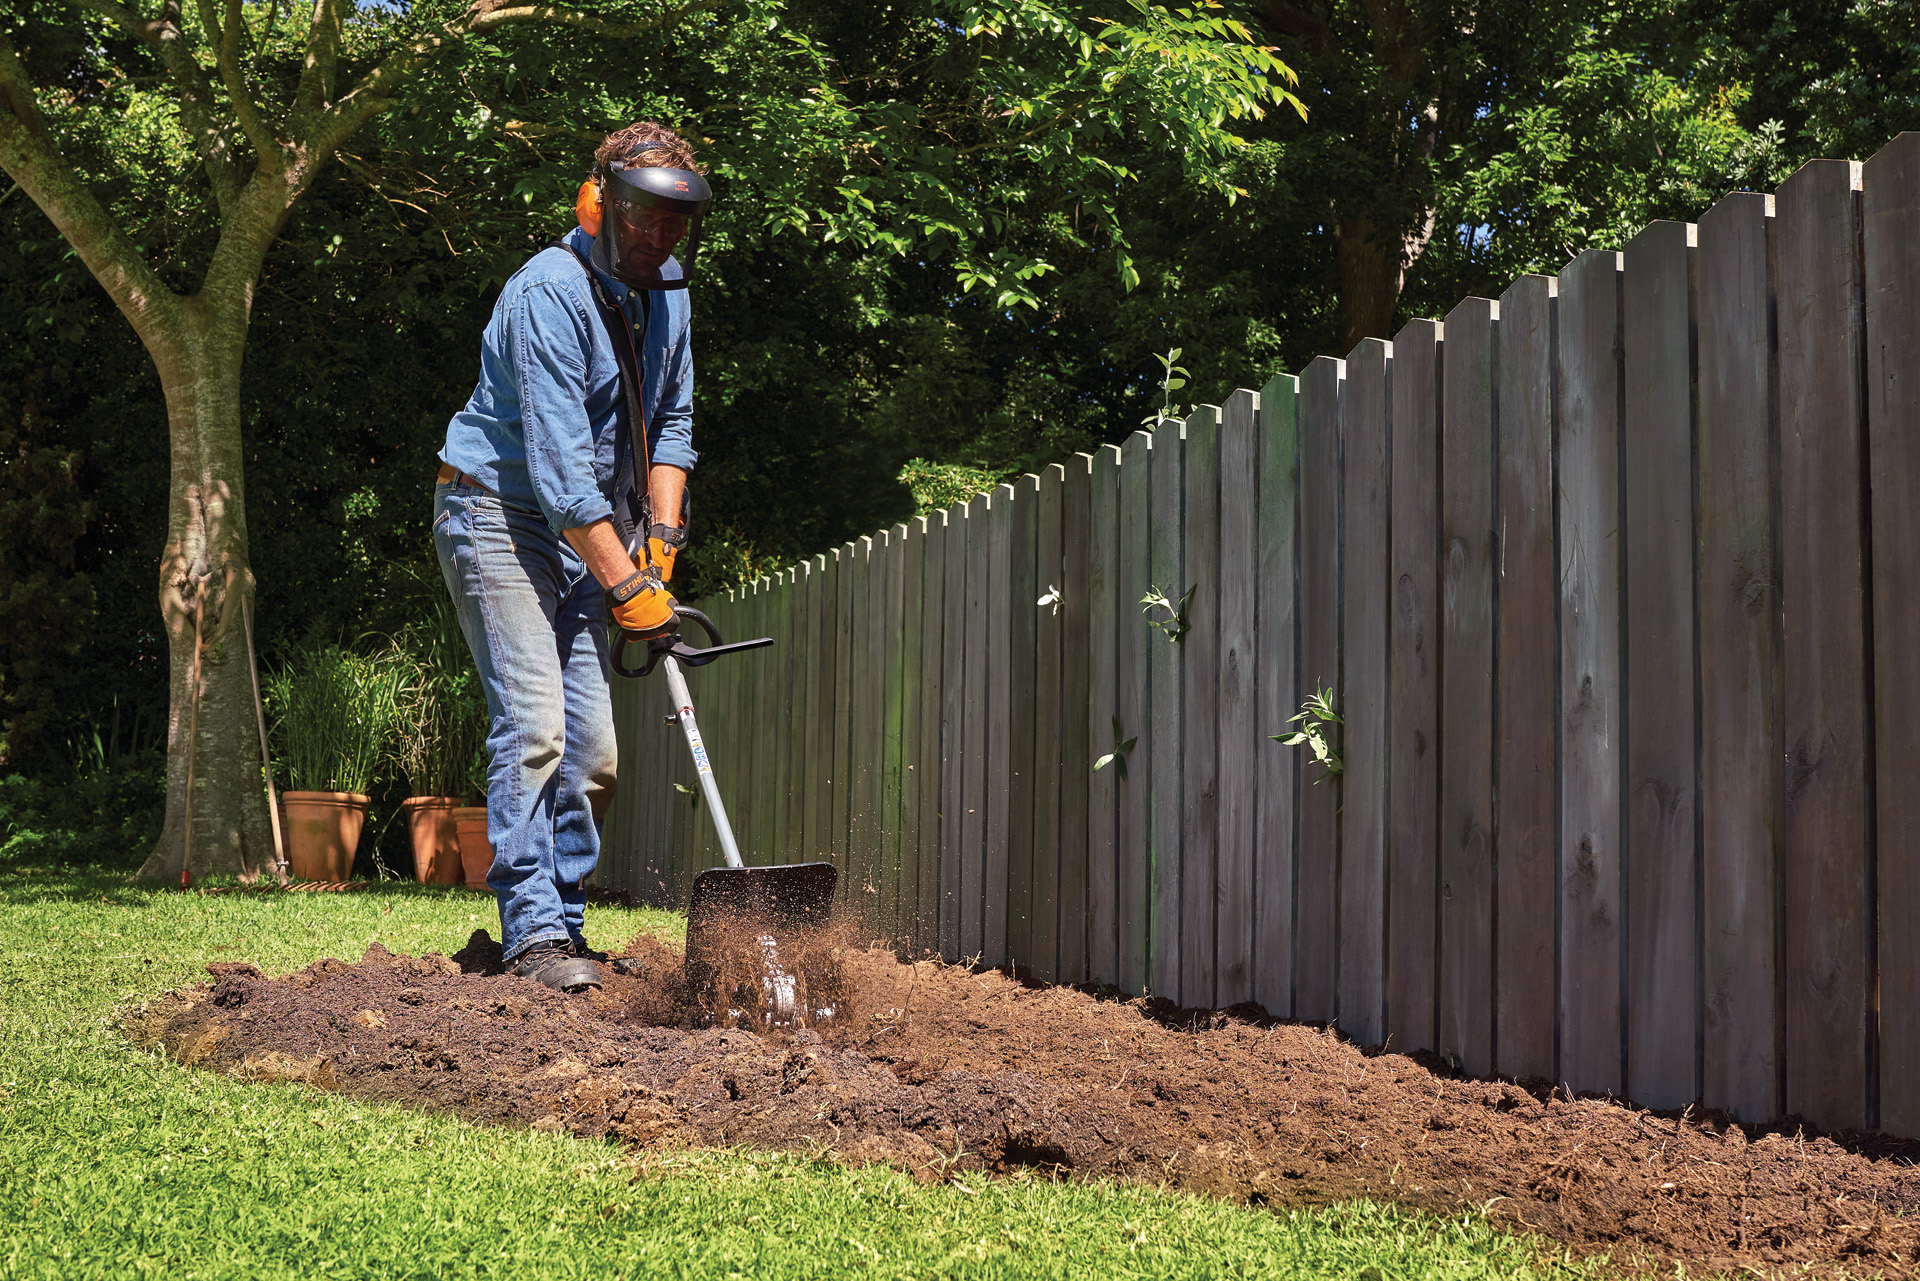 A person wearing personal protective equipment cultivates soil in a garden using a STIHL KombiSystem with pick tine